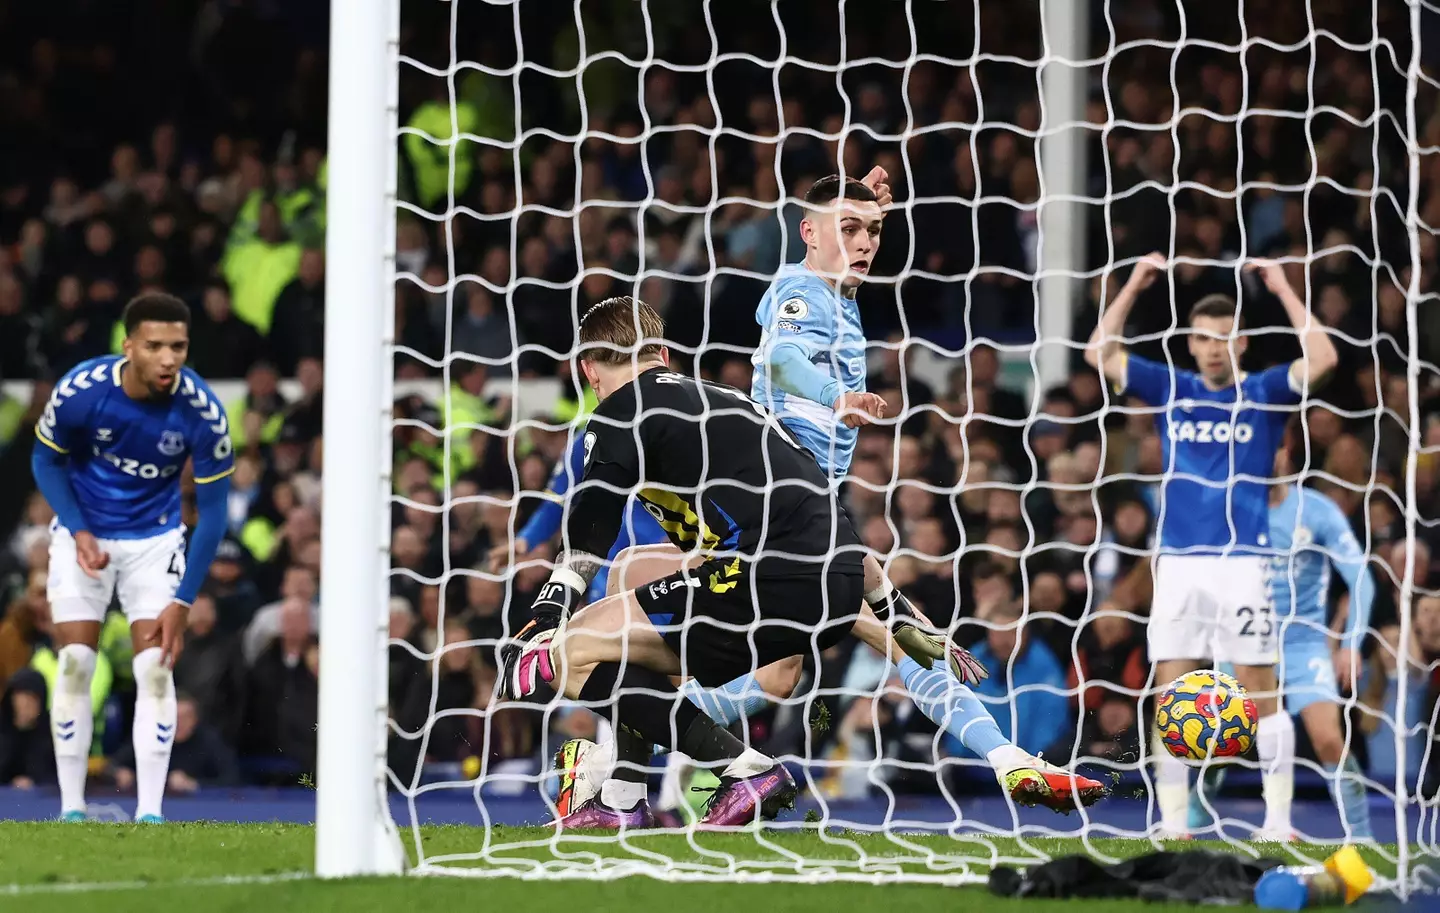 City needed a late winner after Everton 'sat back.' Image: PA Images